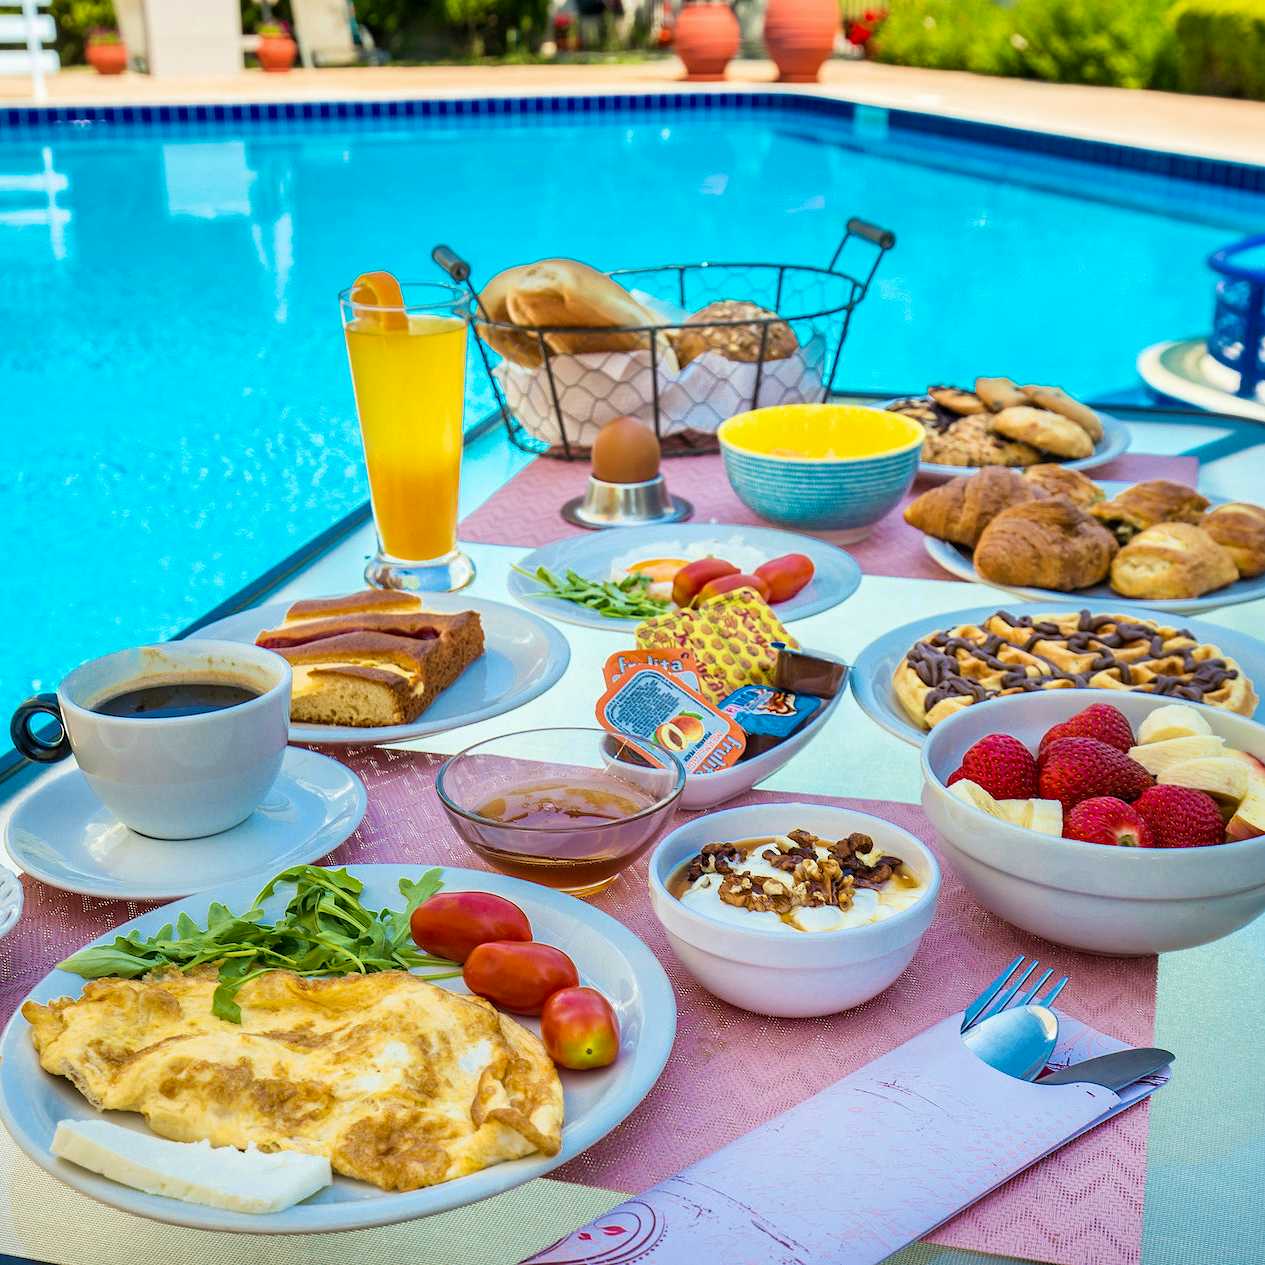 Photo Caption: Eat a delicious breakfast by the pool